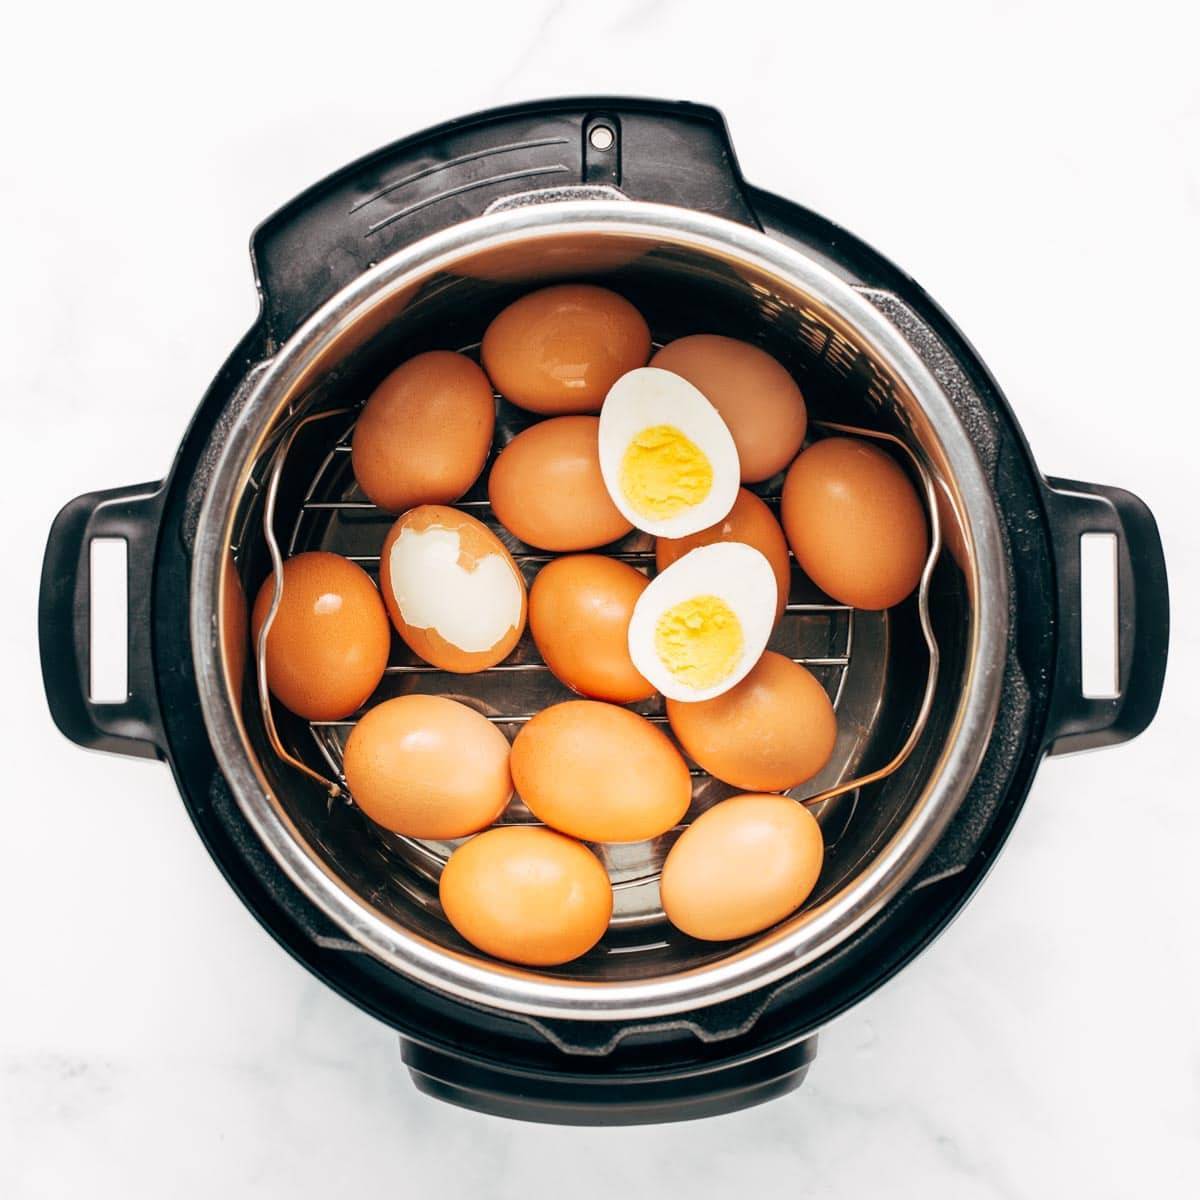 Eggs in the Instant Pot.